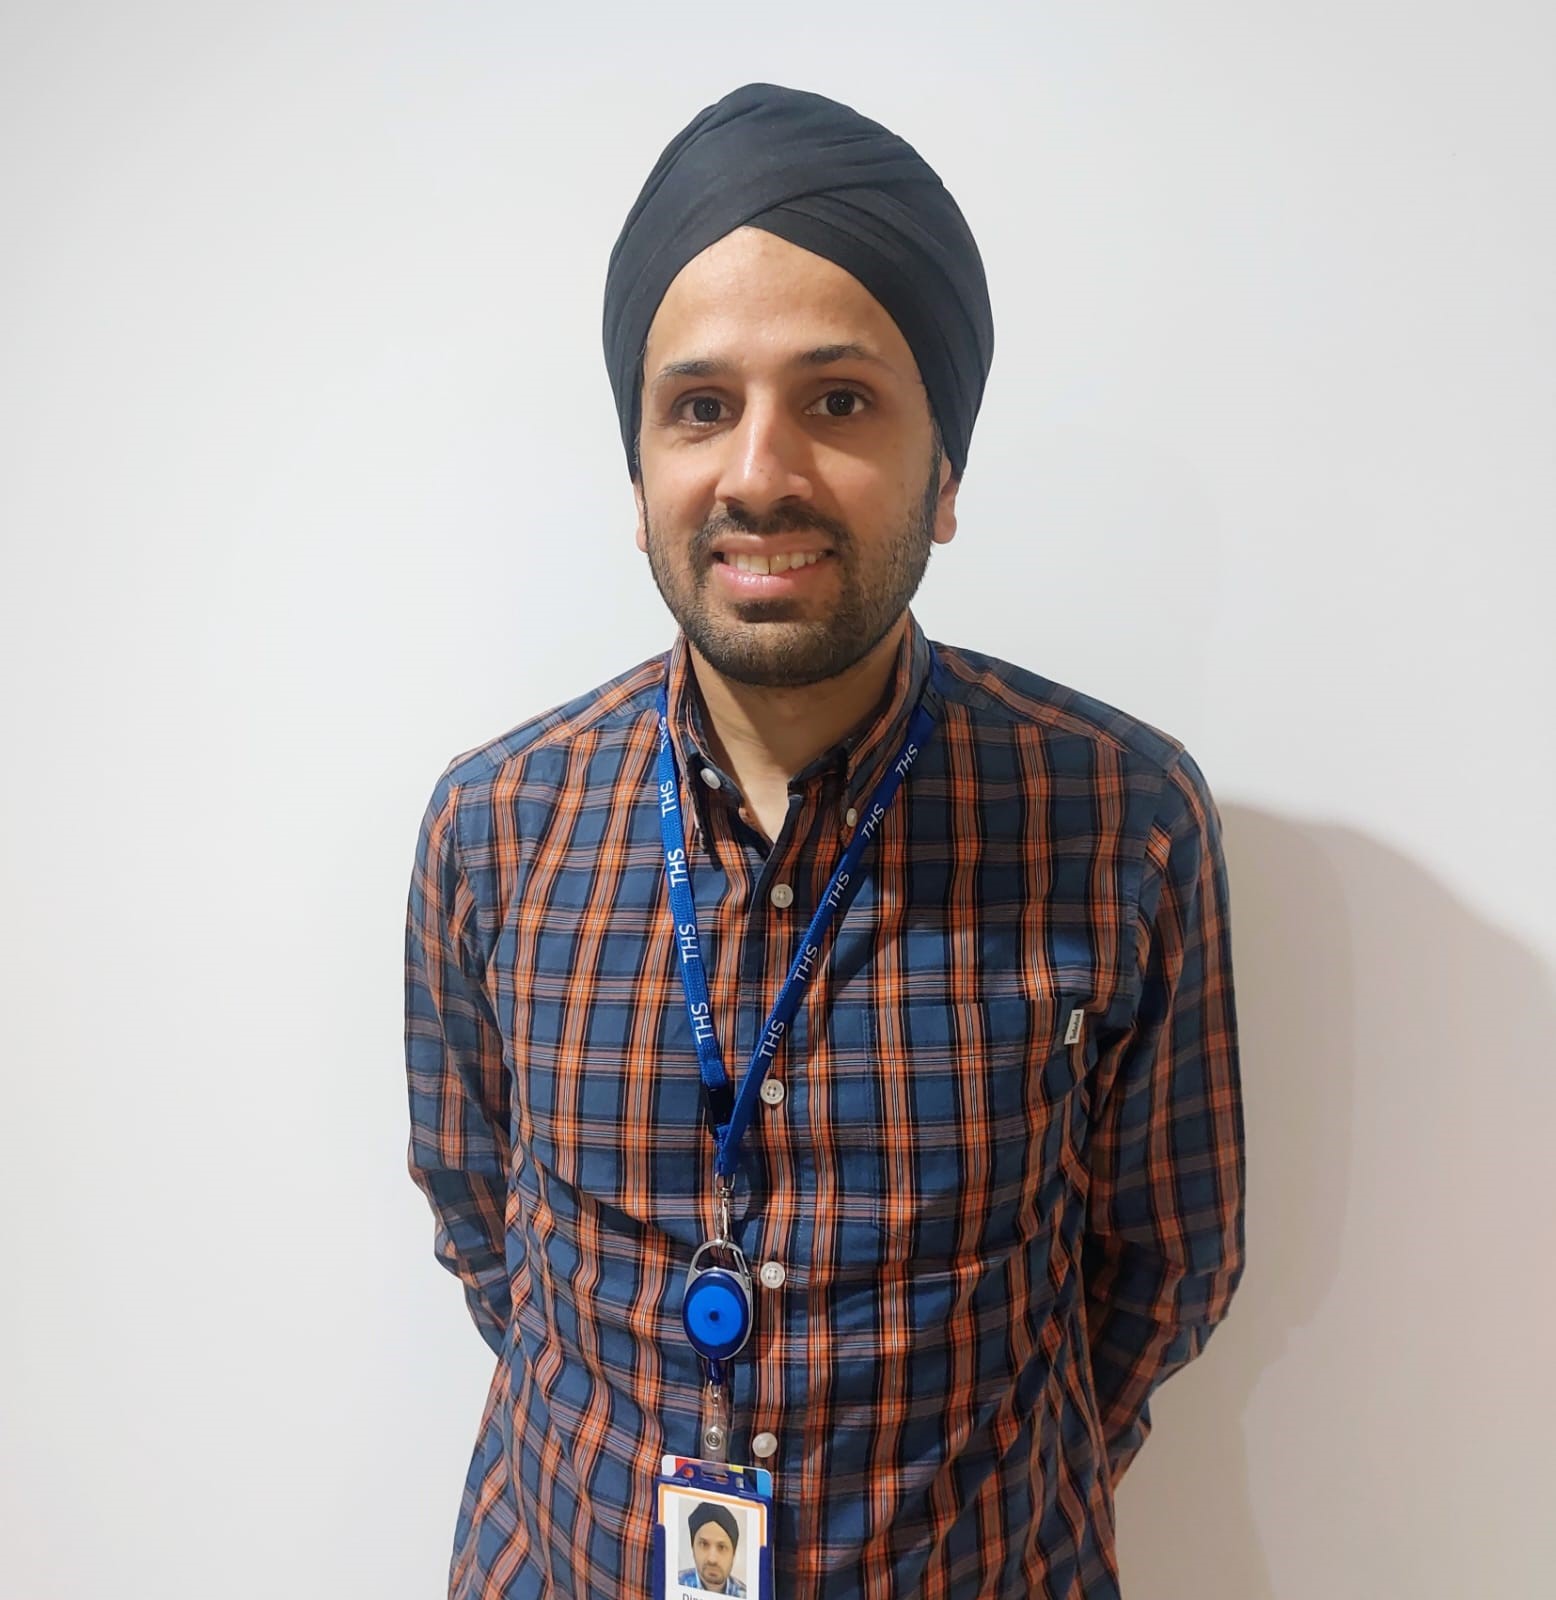 Dr Dinendra Gill is a staff specialist in Emergency Medicine at Launceston General Hospital and the Clinical Director of Medical and Cancer Services at the Royal Hobart Hospital